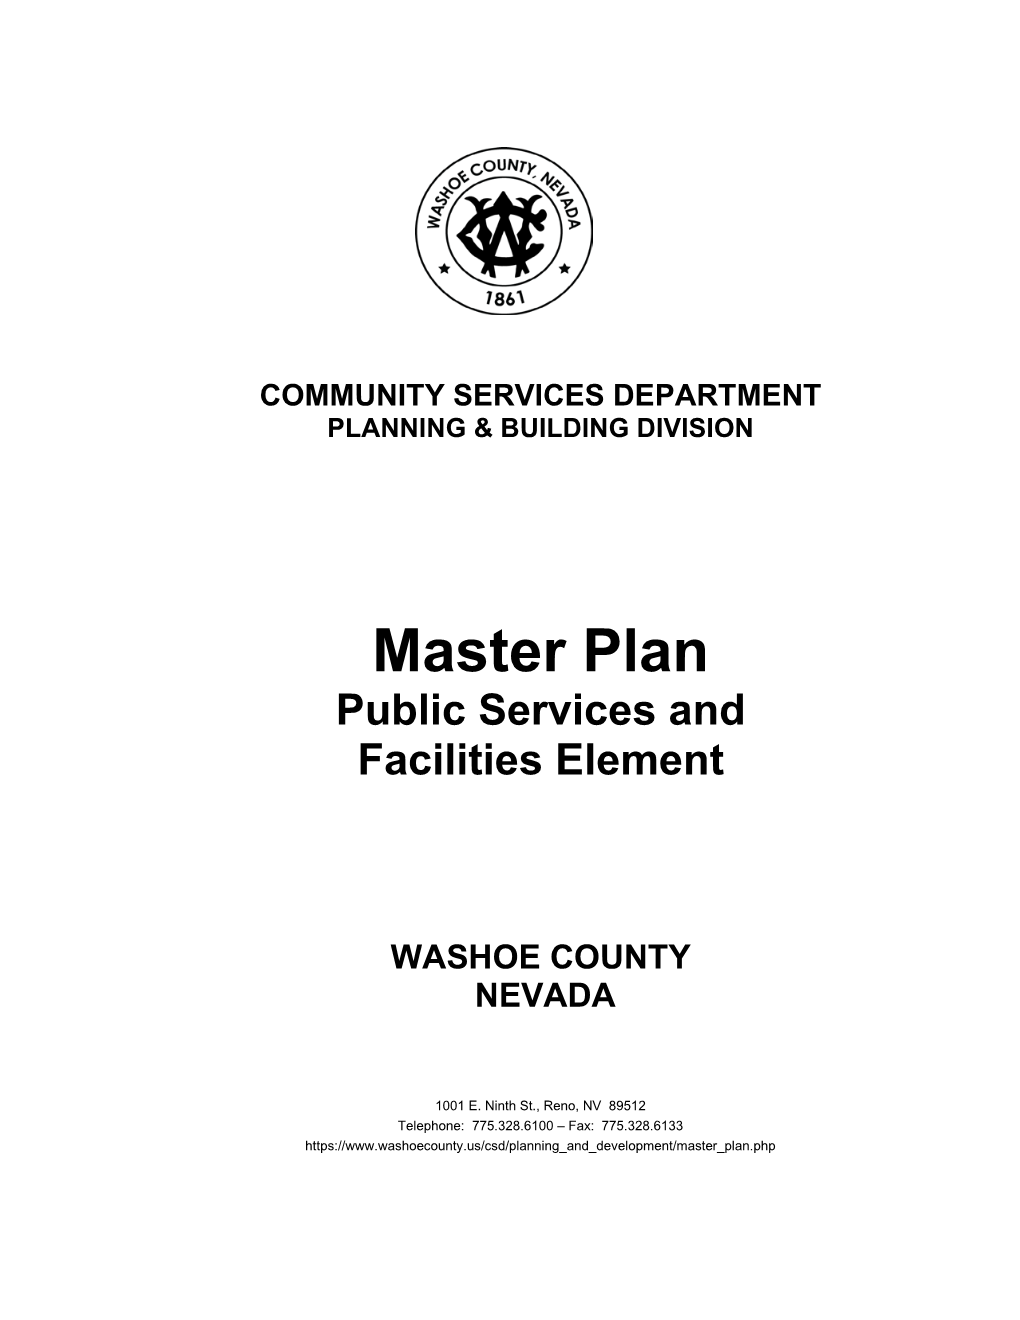 Public Services and Facilities Element